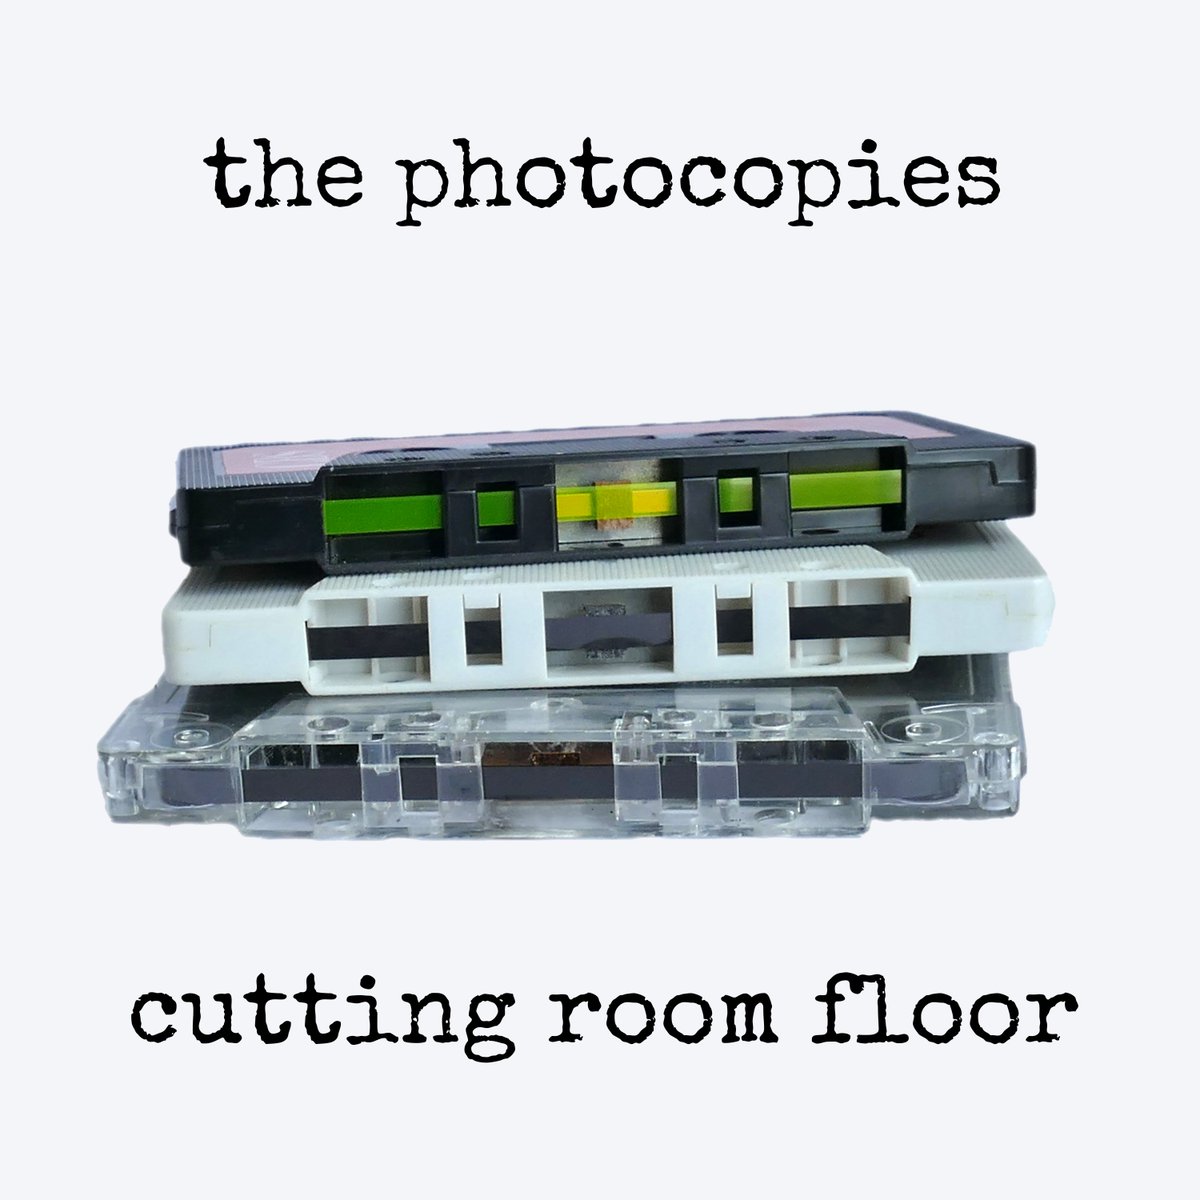 Cutting Room Floor, the ever-expanding collection of demos of unreleased songs, will be back tomorrow, with 2 more demos: Between The Lies and Mixtape Mentality. There's even a video for the latter, despite its audio shortcomings. Only available when it's #BandcampFriday, though!